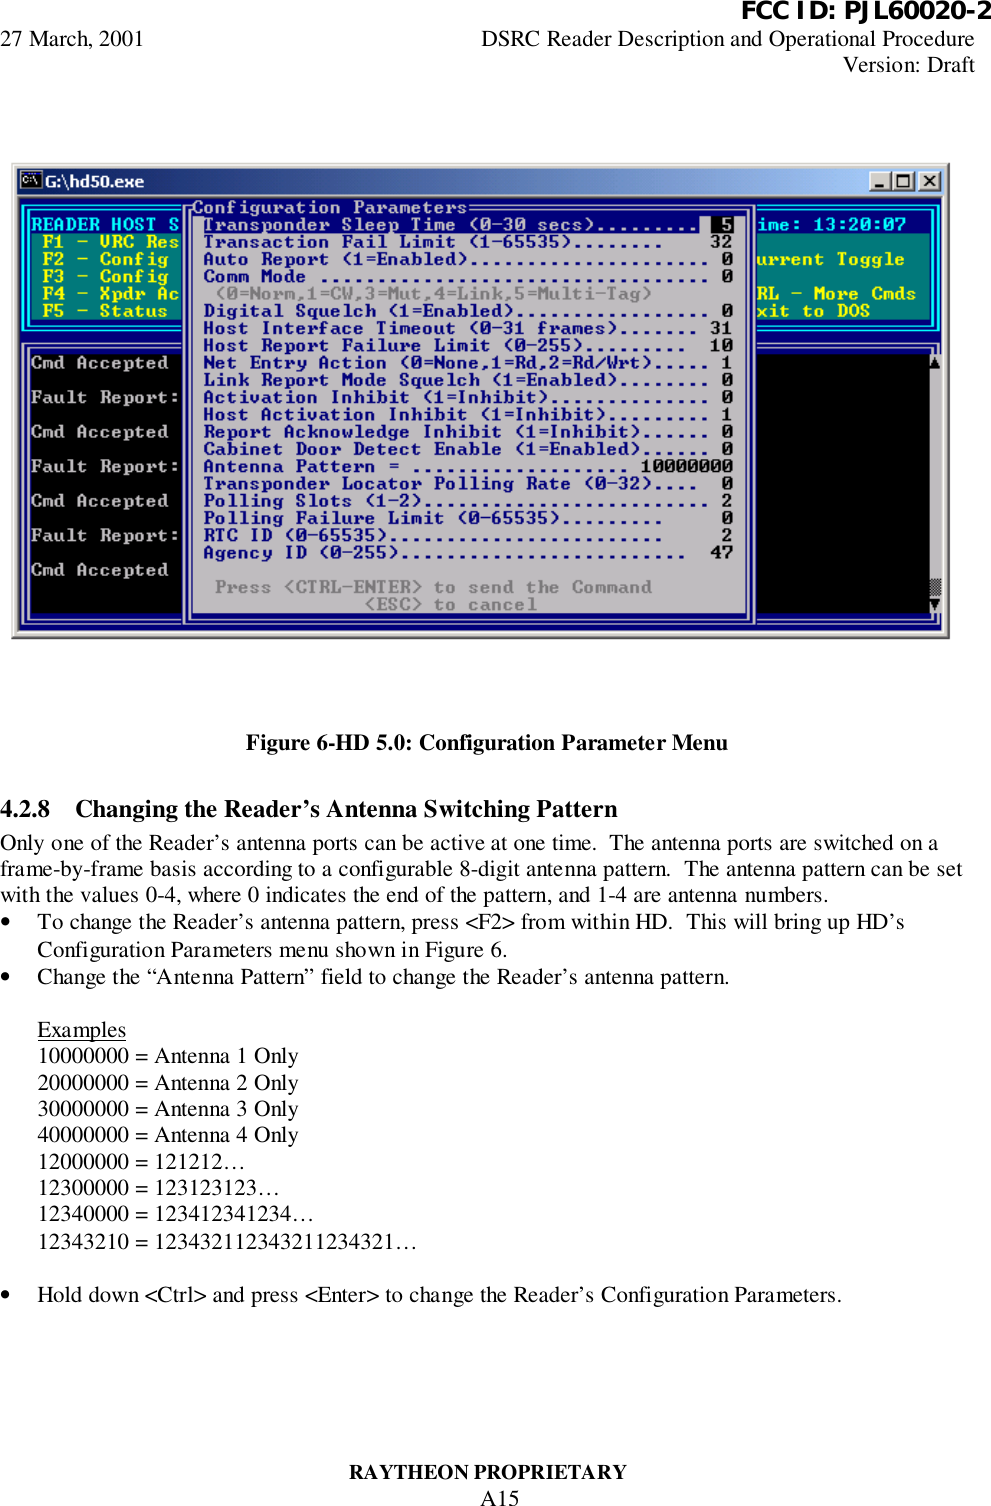          FCC ID: PJL60020-227 March, 2001 DSRC Reader Description and Operational ProcedureVersion: DraftRAYTHEON PROPRIETARYA15Figure 6-HD 5.0: Configuration Parameter Menu4.2.8 Changing the Reader’s Antenna Switching PatternOnly one of the Reader’s antenna ports can be active at one time.  The antenna ports are switched on aframe-by-frame basis according to a configurable 8-digit antenna pattern.  The antenna pattern can be setwith the values 0-4, where 0 indicates the end of the pattern, and 1-4 are antenna numbers.• To change the Reader’s antenna pattern, press &lt;F2&gt; from within HD.  This will bring up HD’sConfiguration Parameters menu shown in Figure 6.• Change the “Antenna Pattern” field to change the Reader’s antenna pattern.Examples10000000 = Antenna 1 Only20000000 = Antenna 2 Only30000000 = Antenna 3 Only40000000 = Antenna 4 Only12000000 = 121212…12300000 = 123123123…12340000 = 123412341234…12343210 = 123432112343211234321…• Hold down &lt;Ctrl&gt; and press &lt;Enter&gt; to change the Reader’s Configuration Parameters.